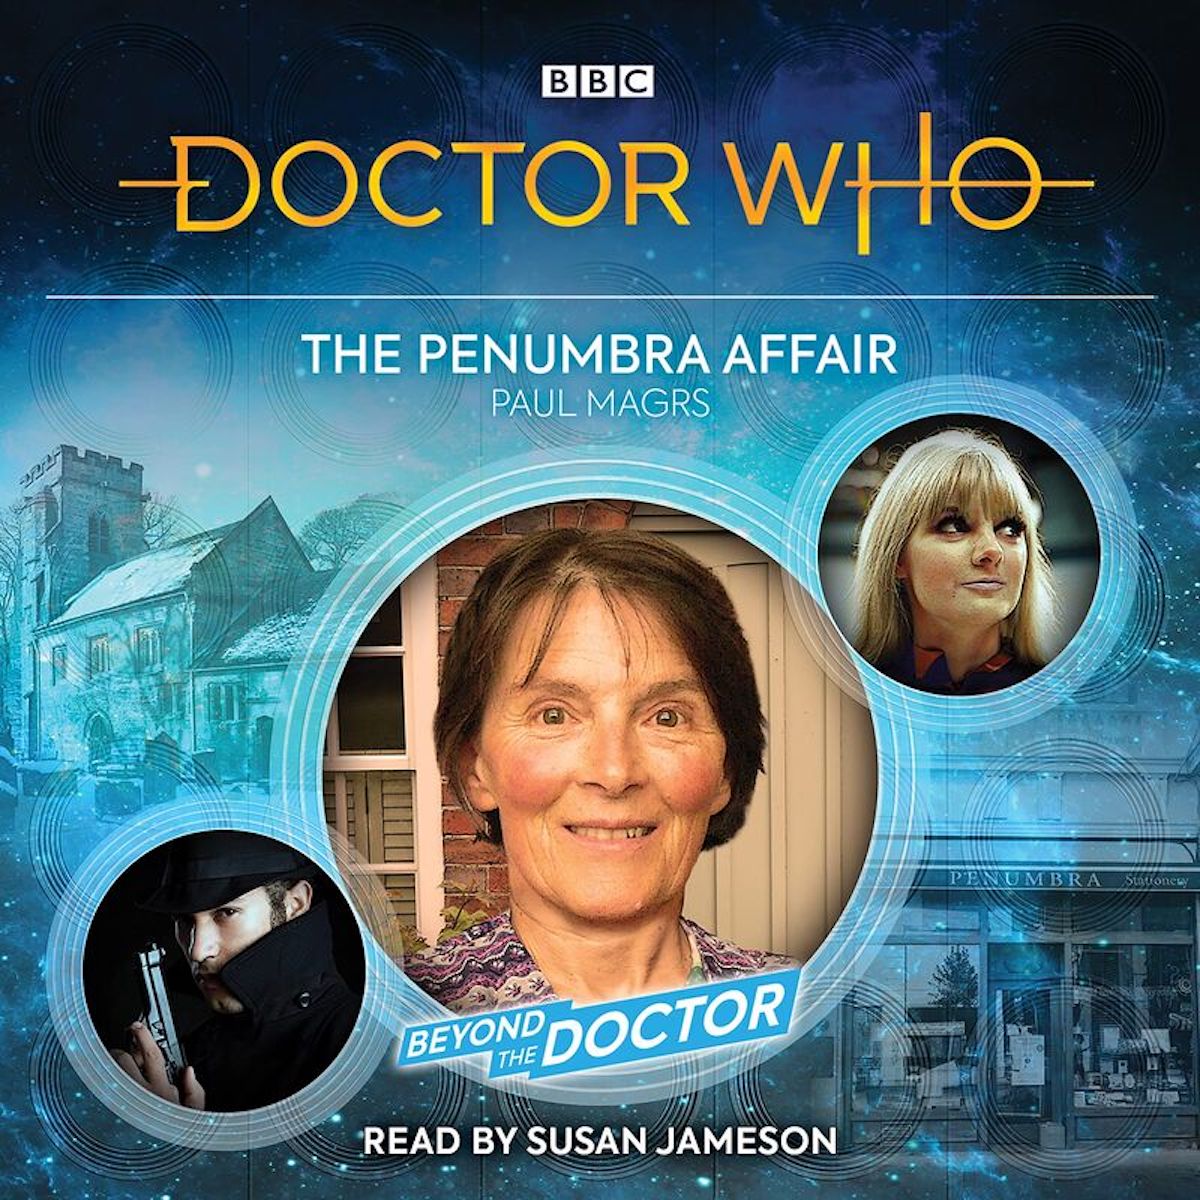 Beyond The Doctor: The Penumbra Affair